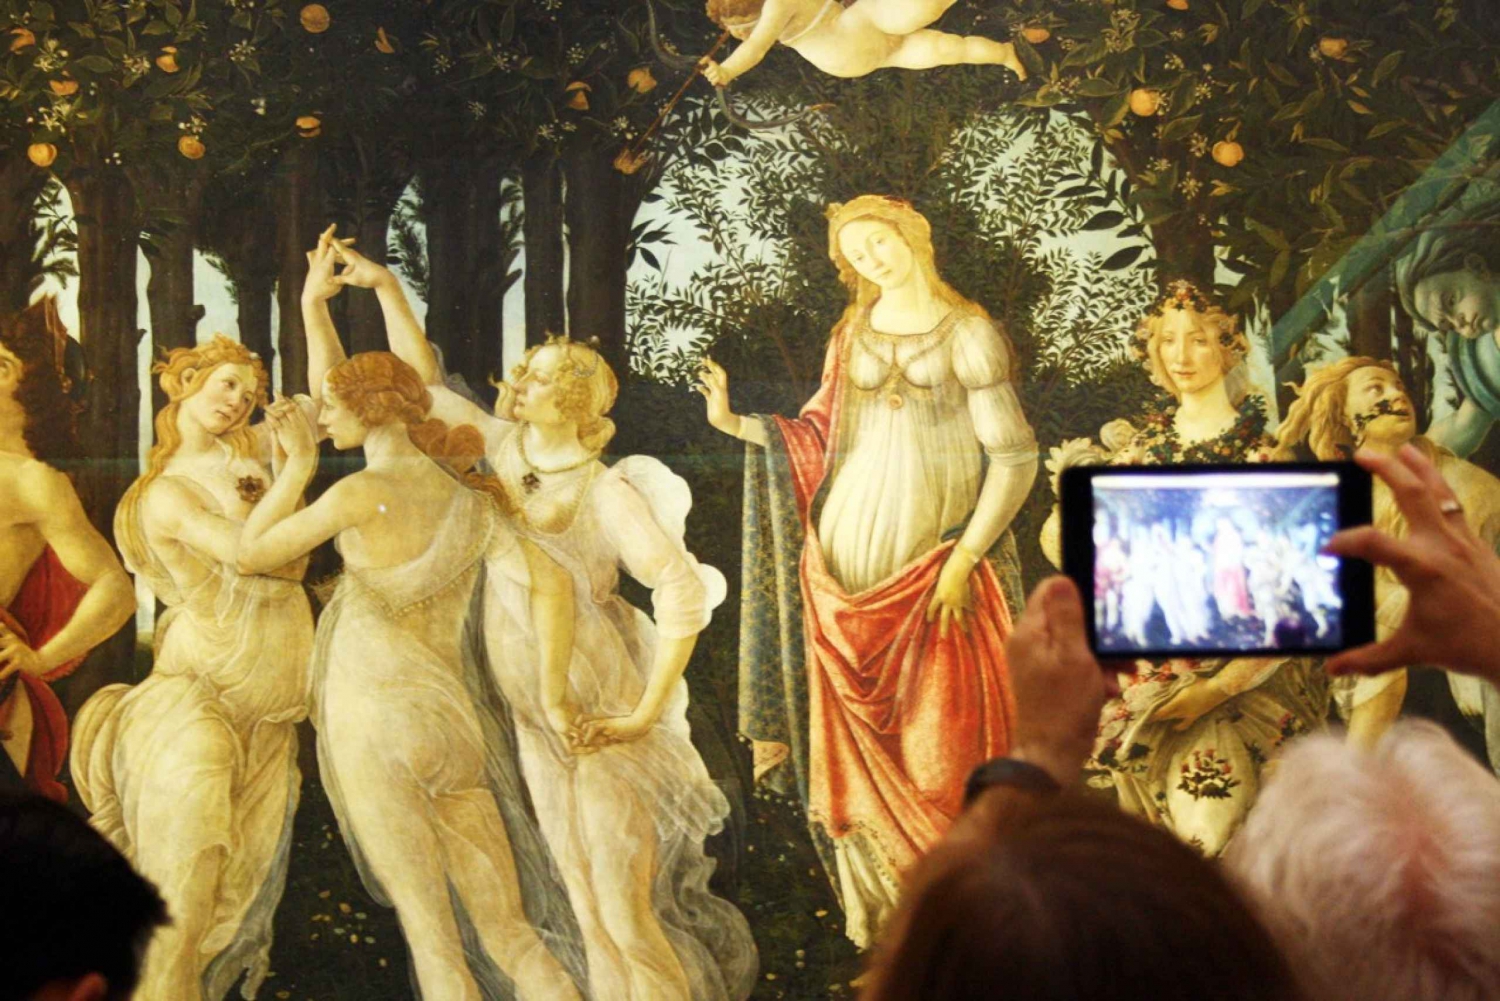 Florence: 4-Hour Accademia and Uffizi Gallaries Guided Tour